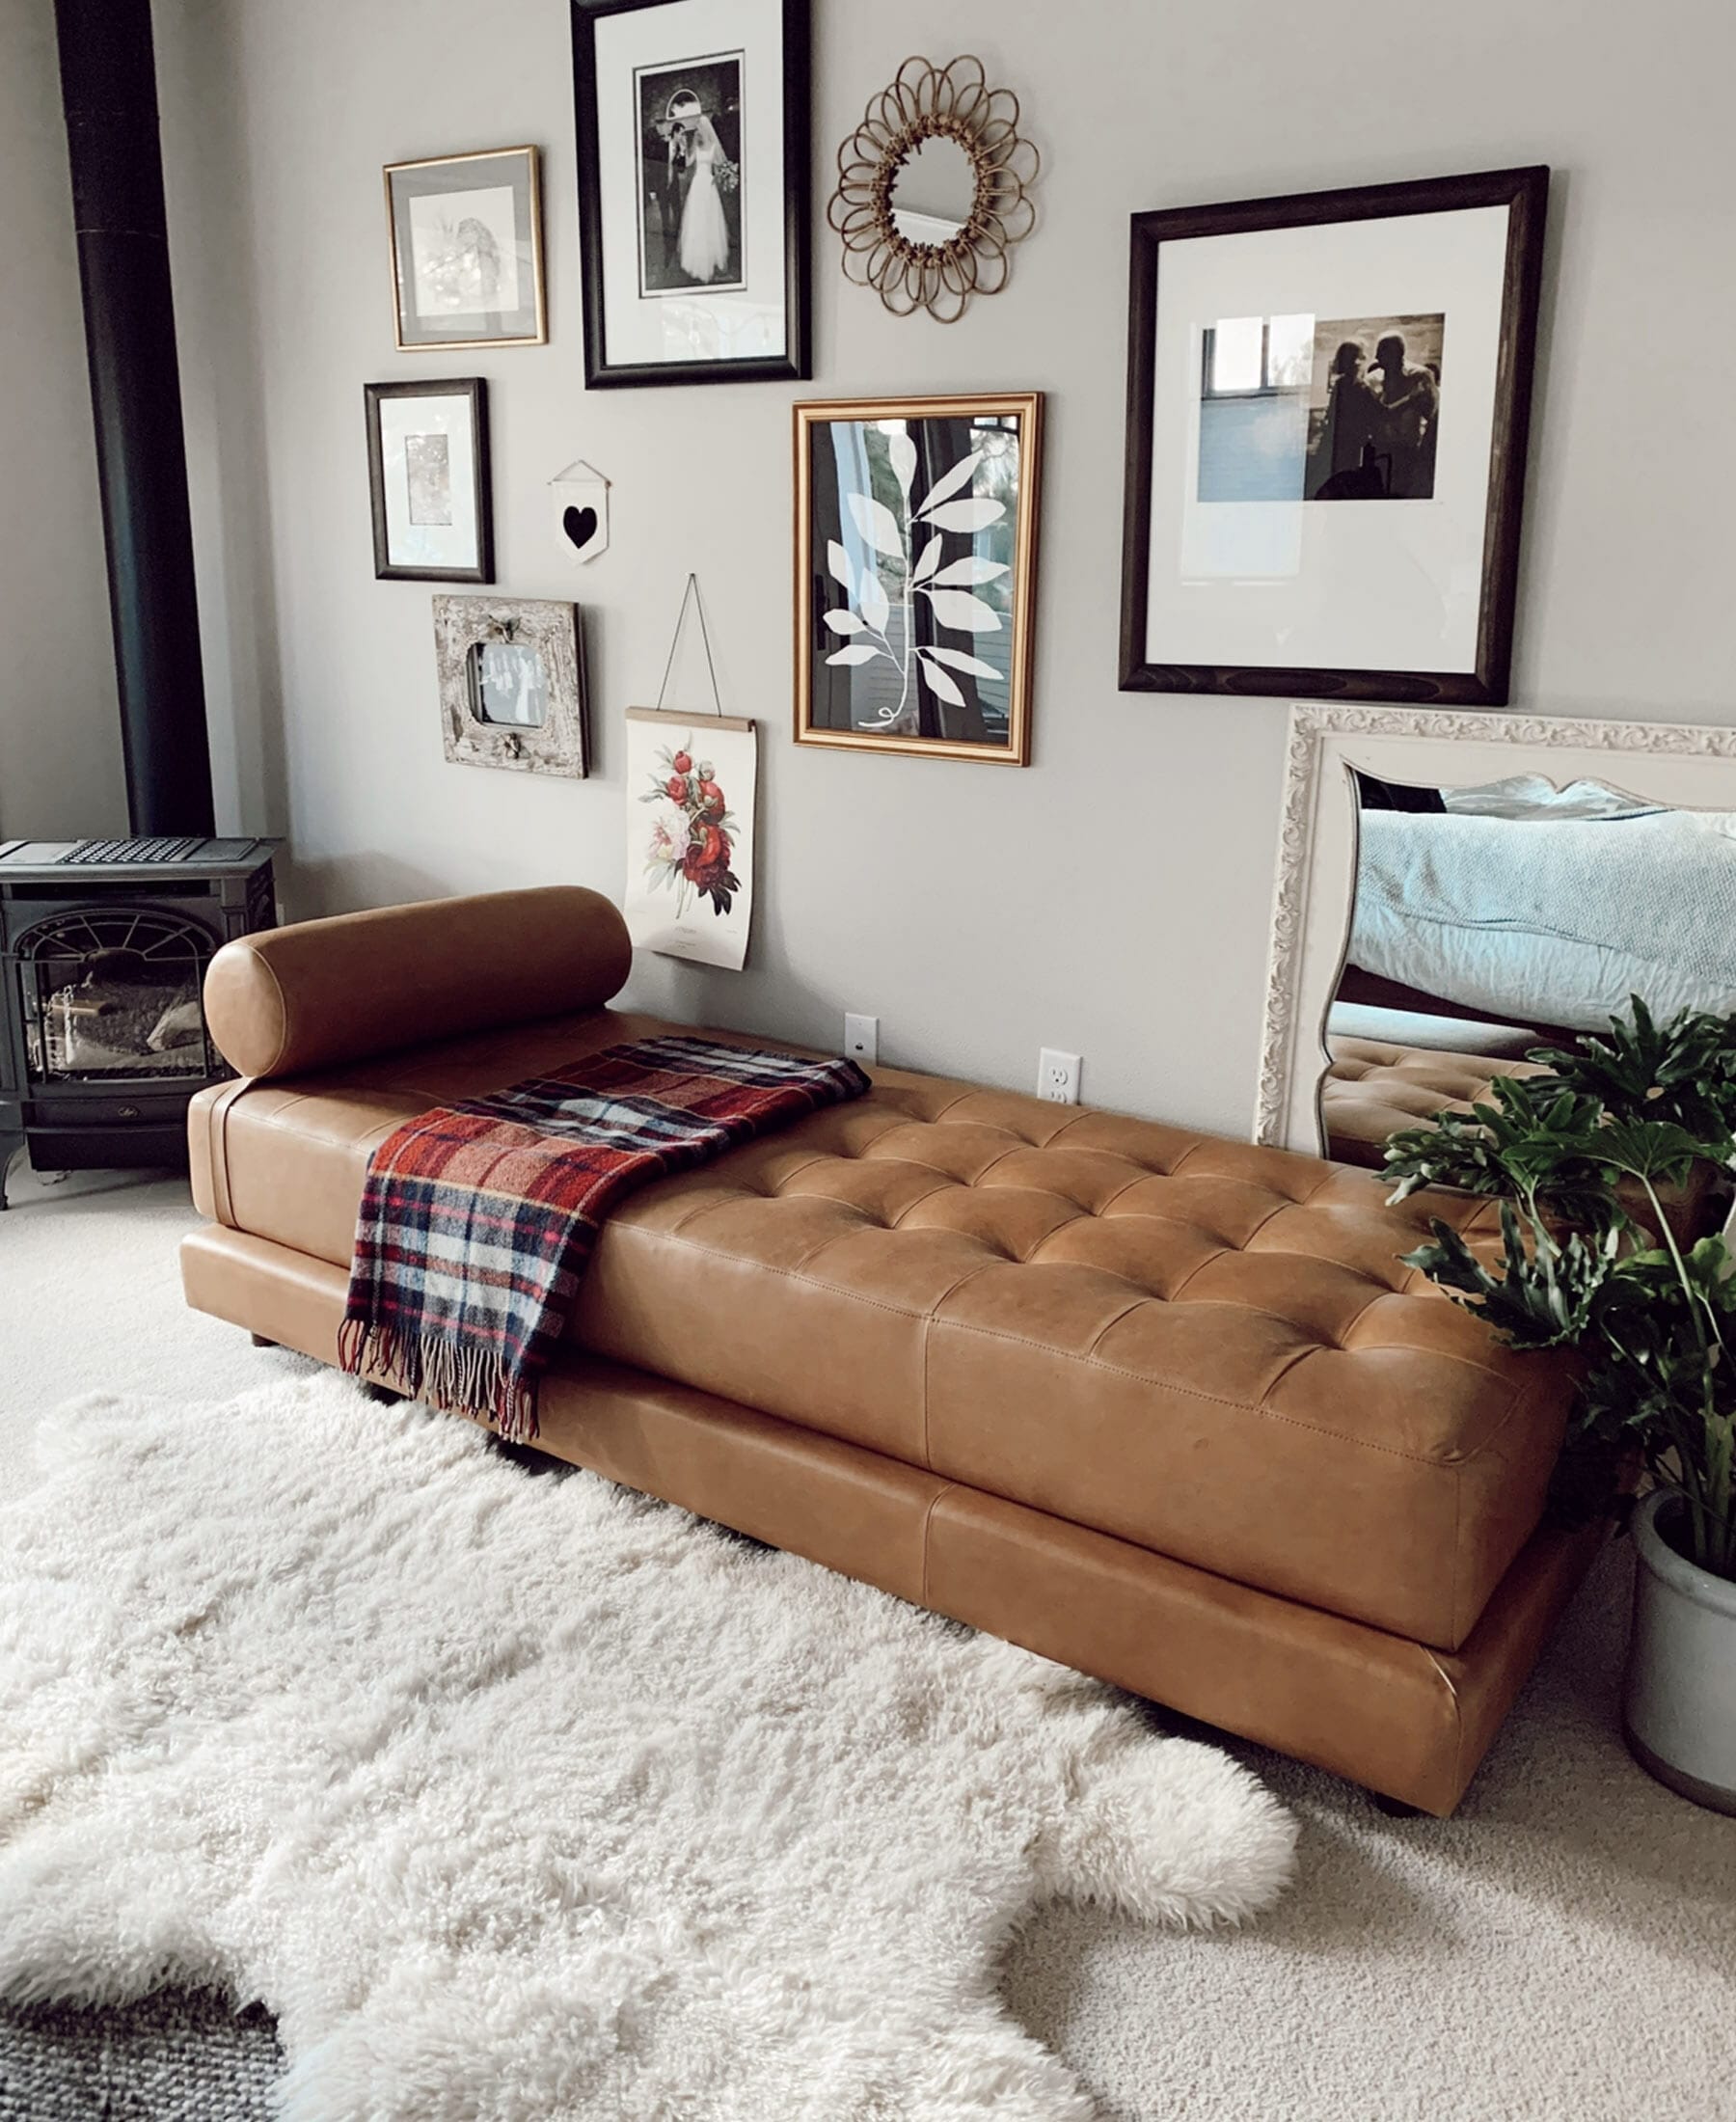 A brown leather daybed sitting beside a fluffy white throw rug.